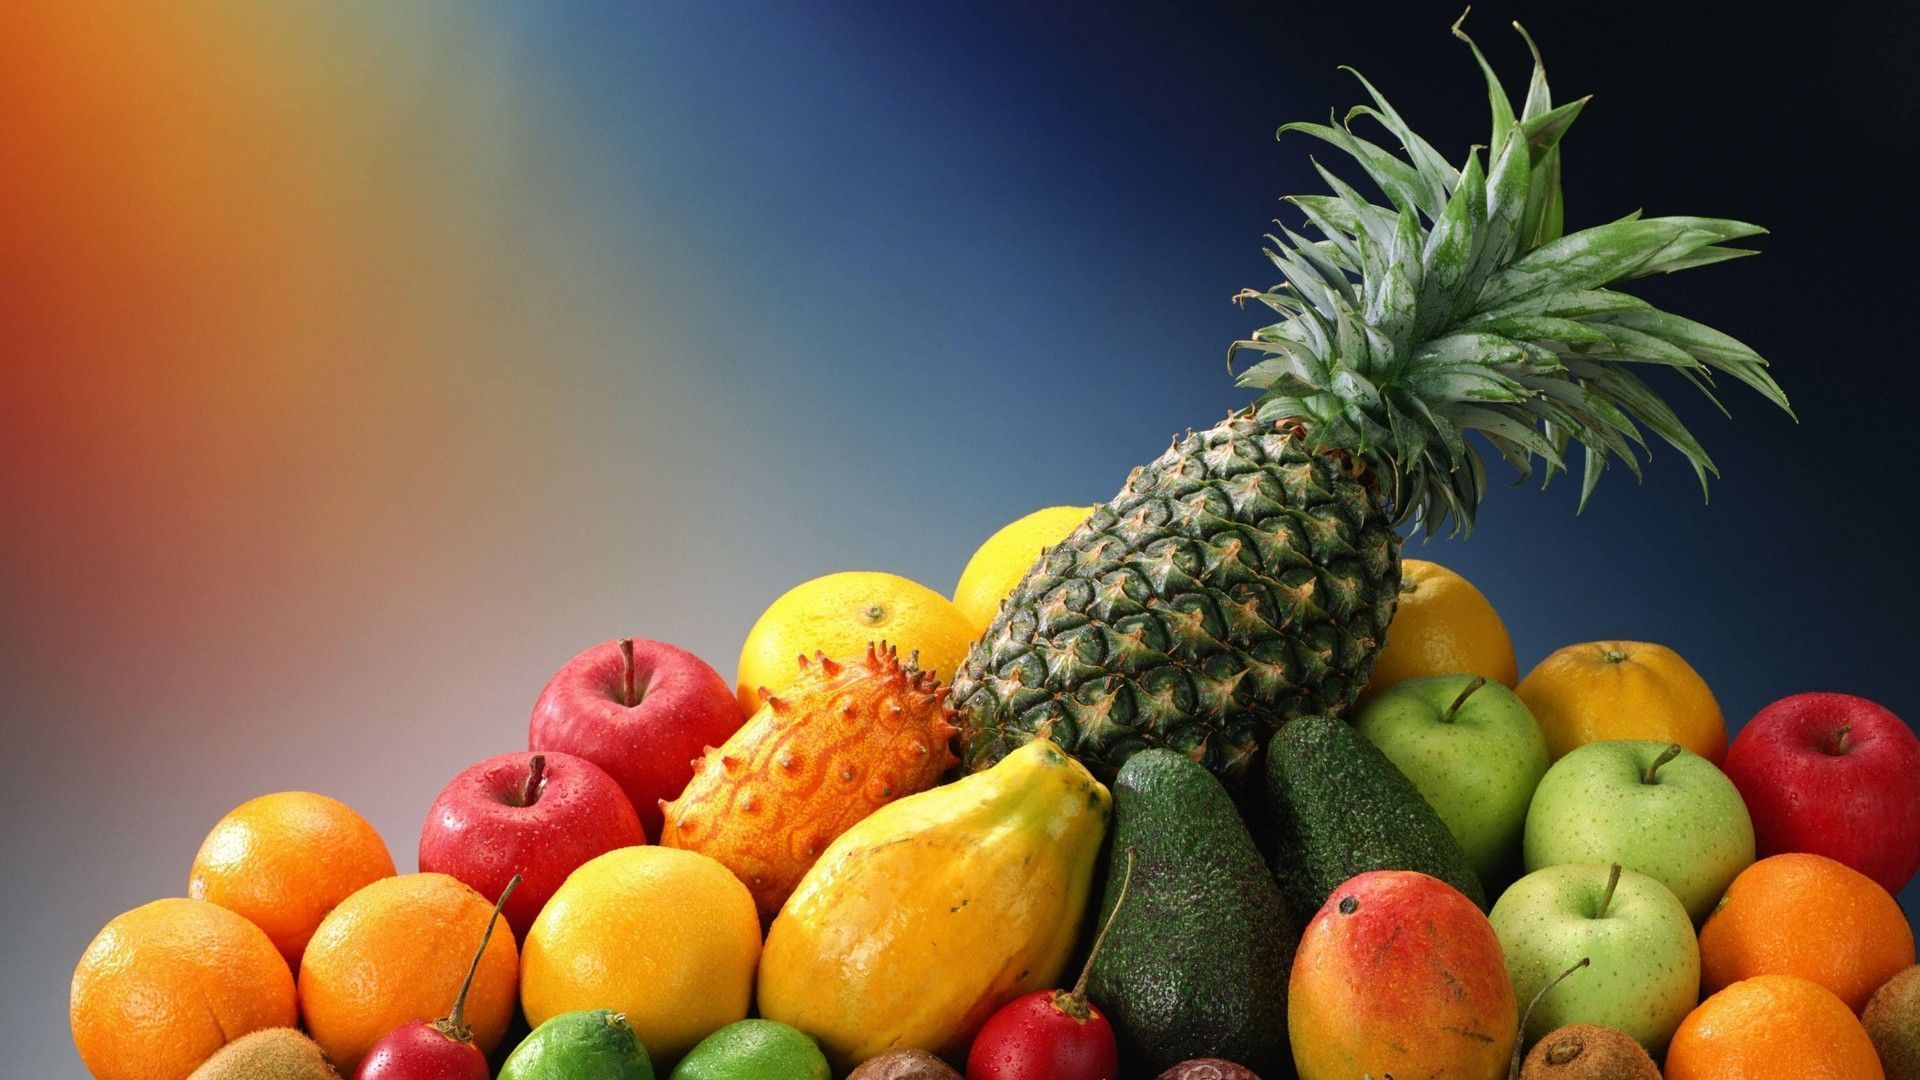 Fruits Wallpapers - HD Desktop Backgrounds - Page 49